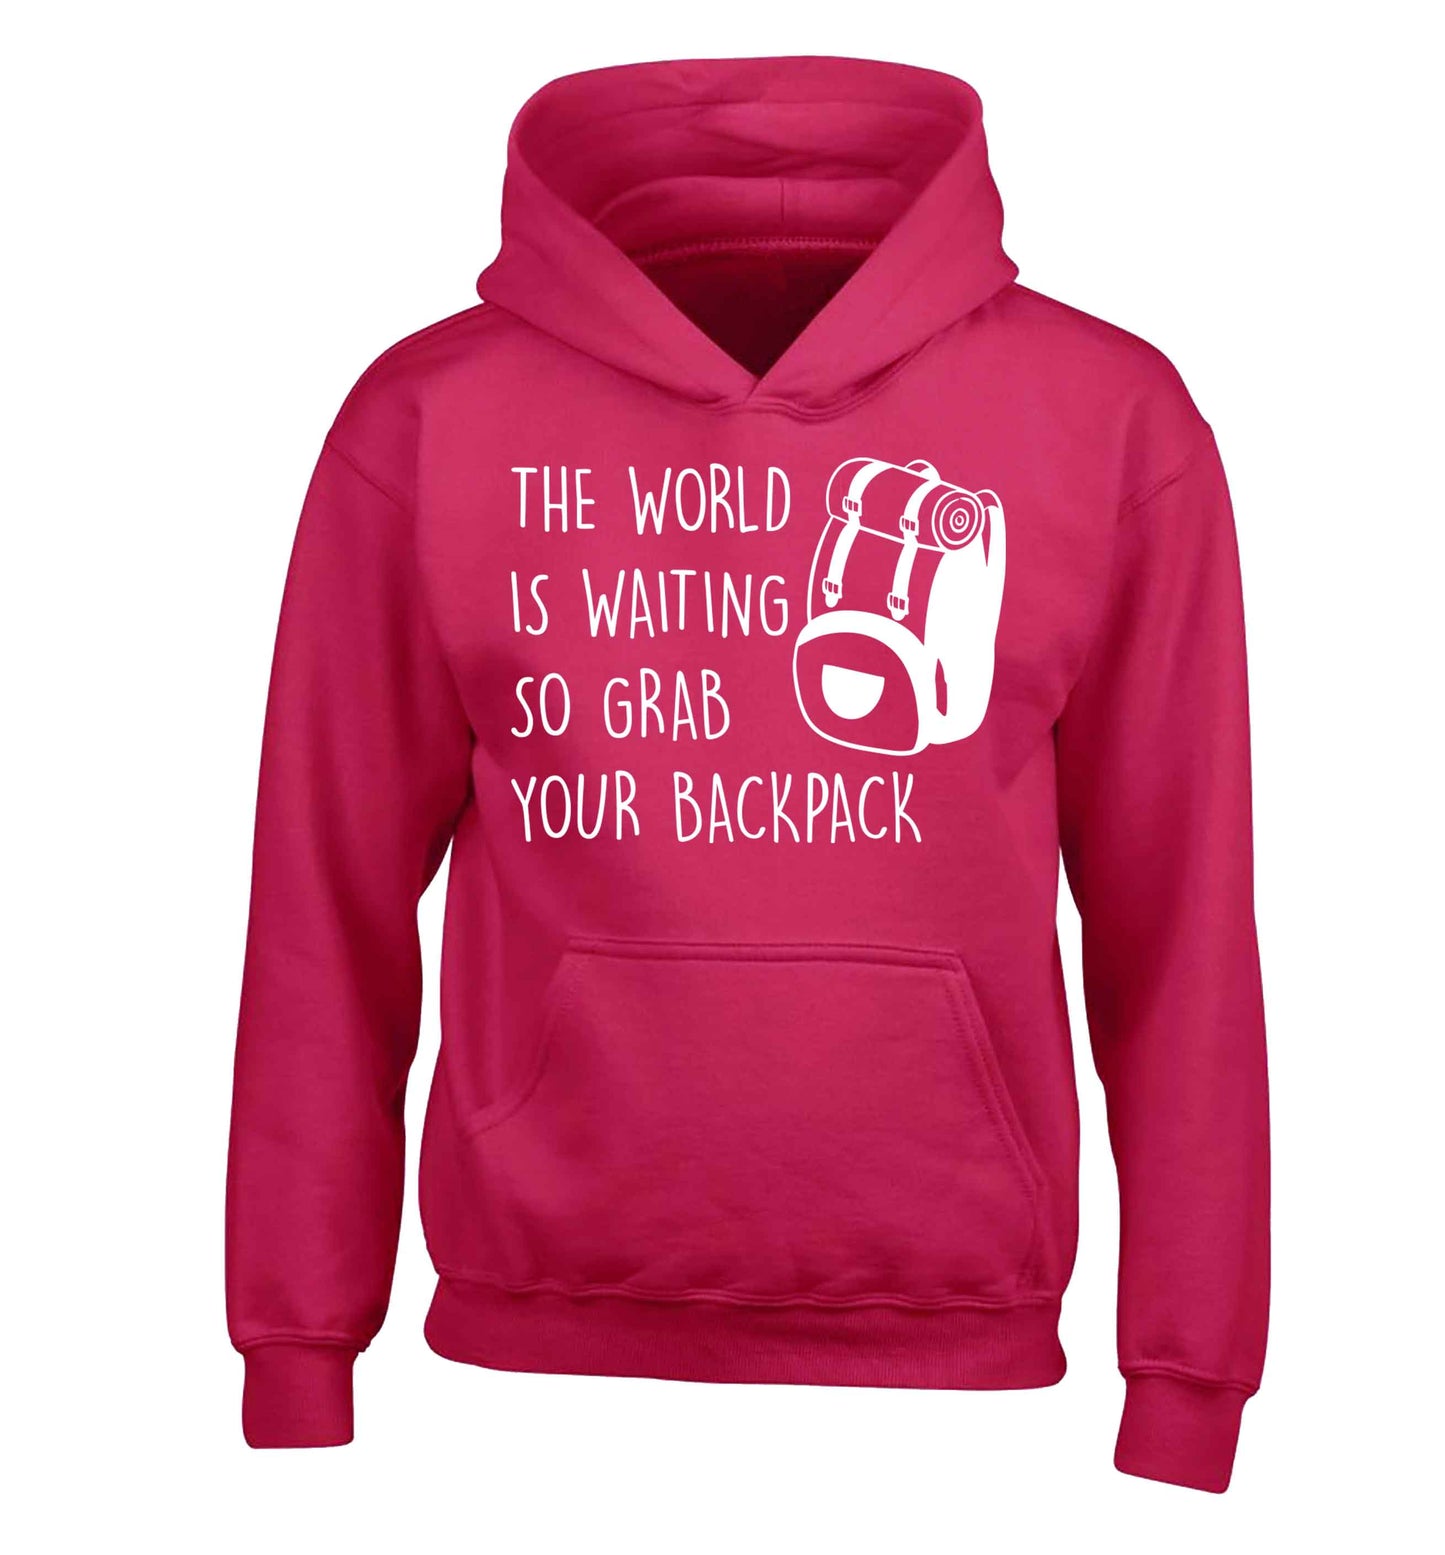 The world is waiting so grab your backpack children's pink hoodie 12-13 Years